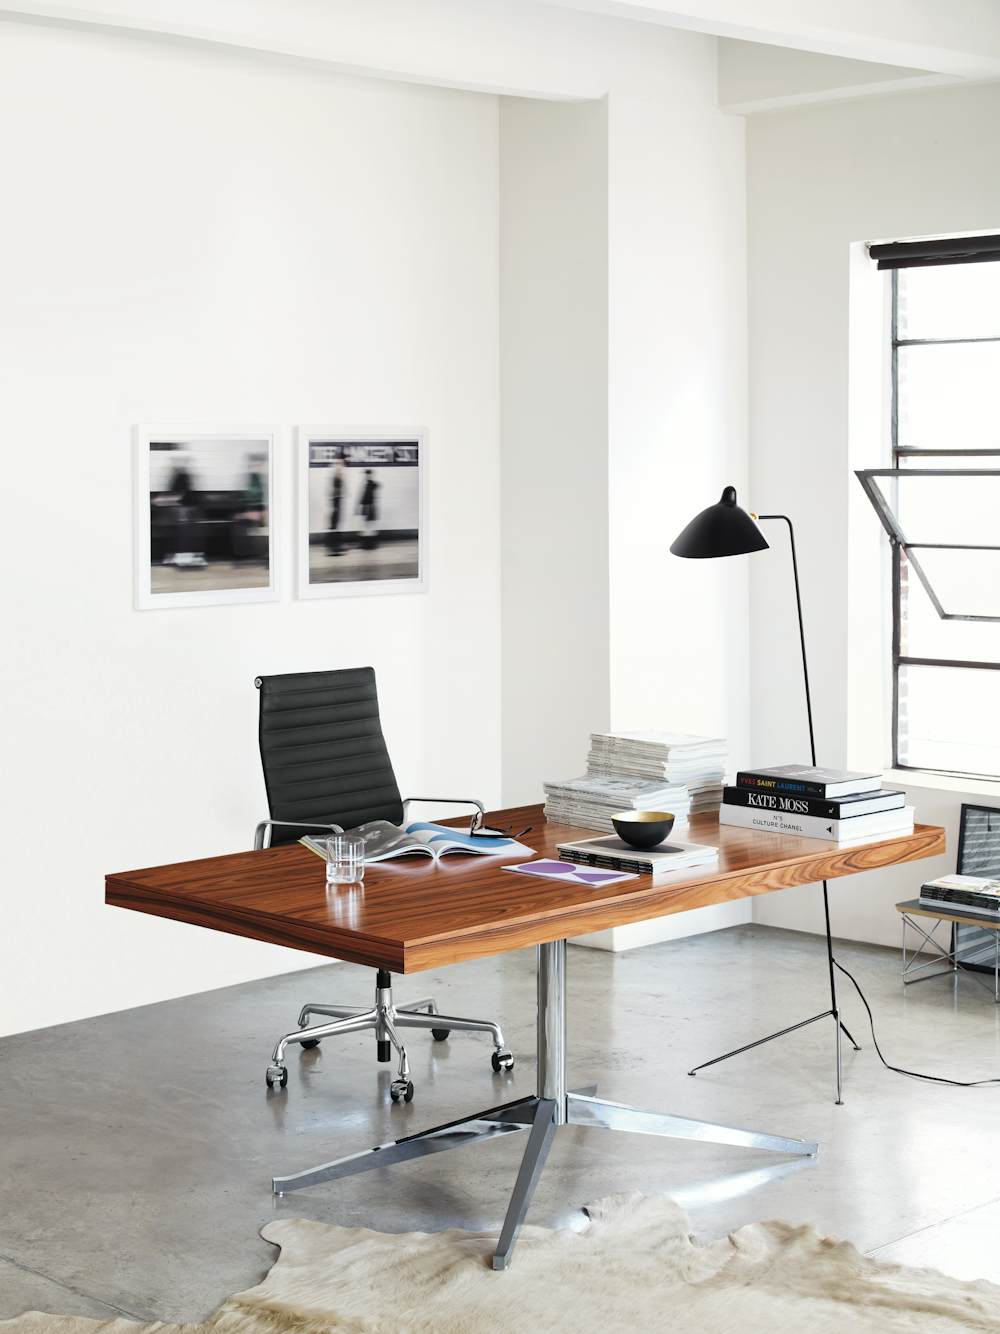 Florence Knoll Executive Desk with Eames Aluminum Group Executive Chair in a home office setting